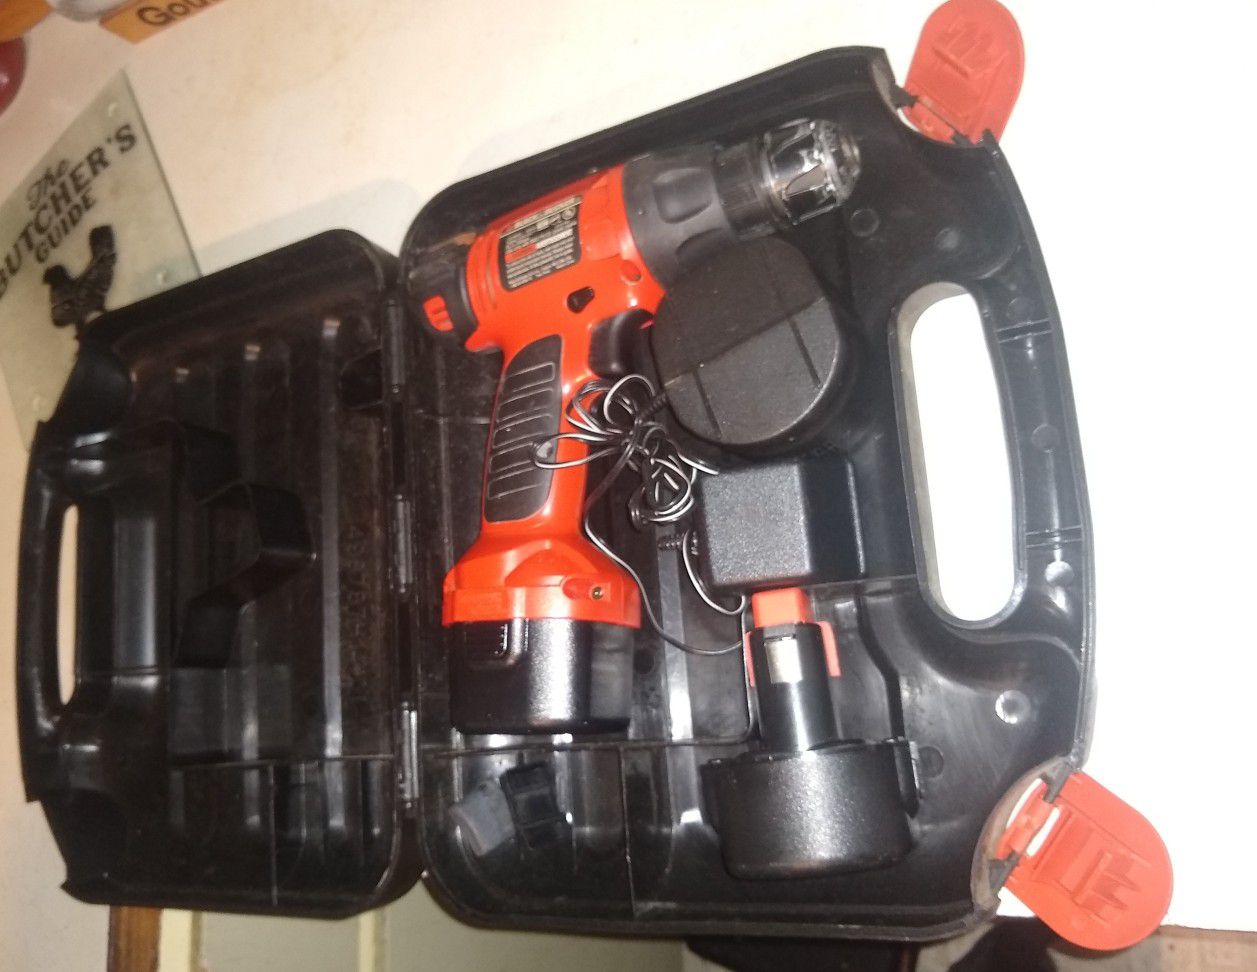 Black & Decker Drill with extra battery